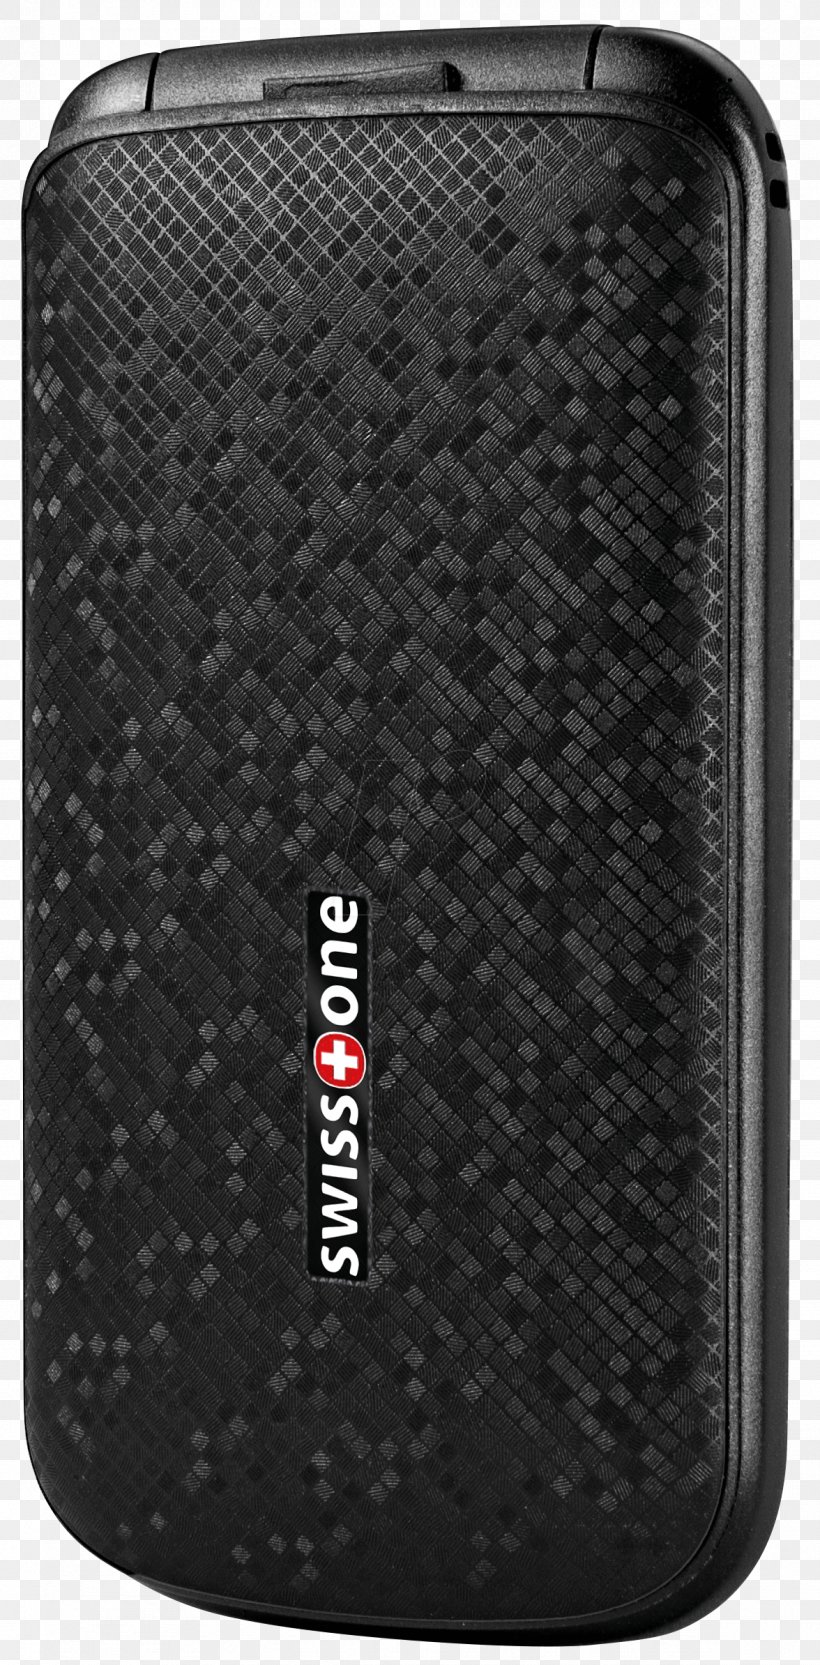 Swisstone SC550 Hardware/Electronic Swisstone SC 330 Flip Top Mobile Phone Feature Phone Mobile Phone Accessories Design, PNG, 1176x2388px, Feature Phone, Black, Black M, Bolcom, Case Download Free